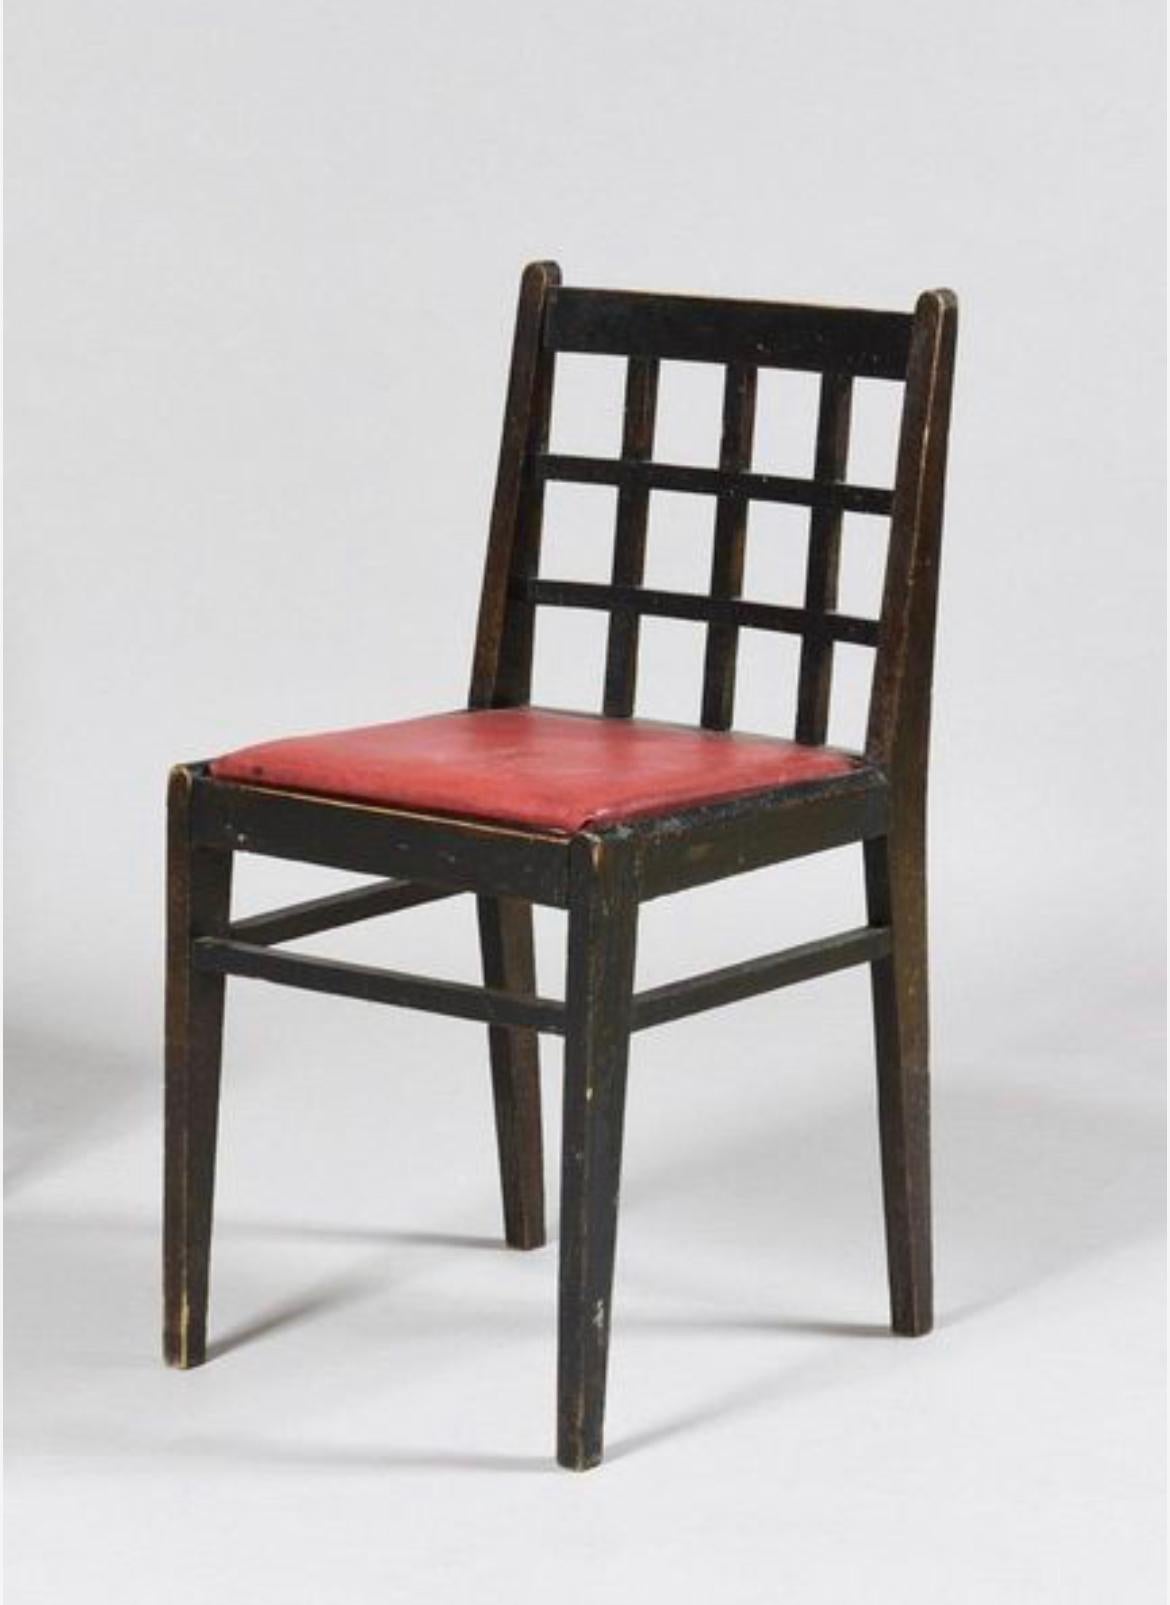 20th Century Pair of 555 Bleech Chair and Red Skaï Seat by René Gabriel, Norma, 1941 For Sale